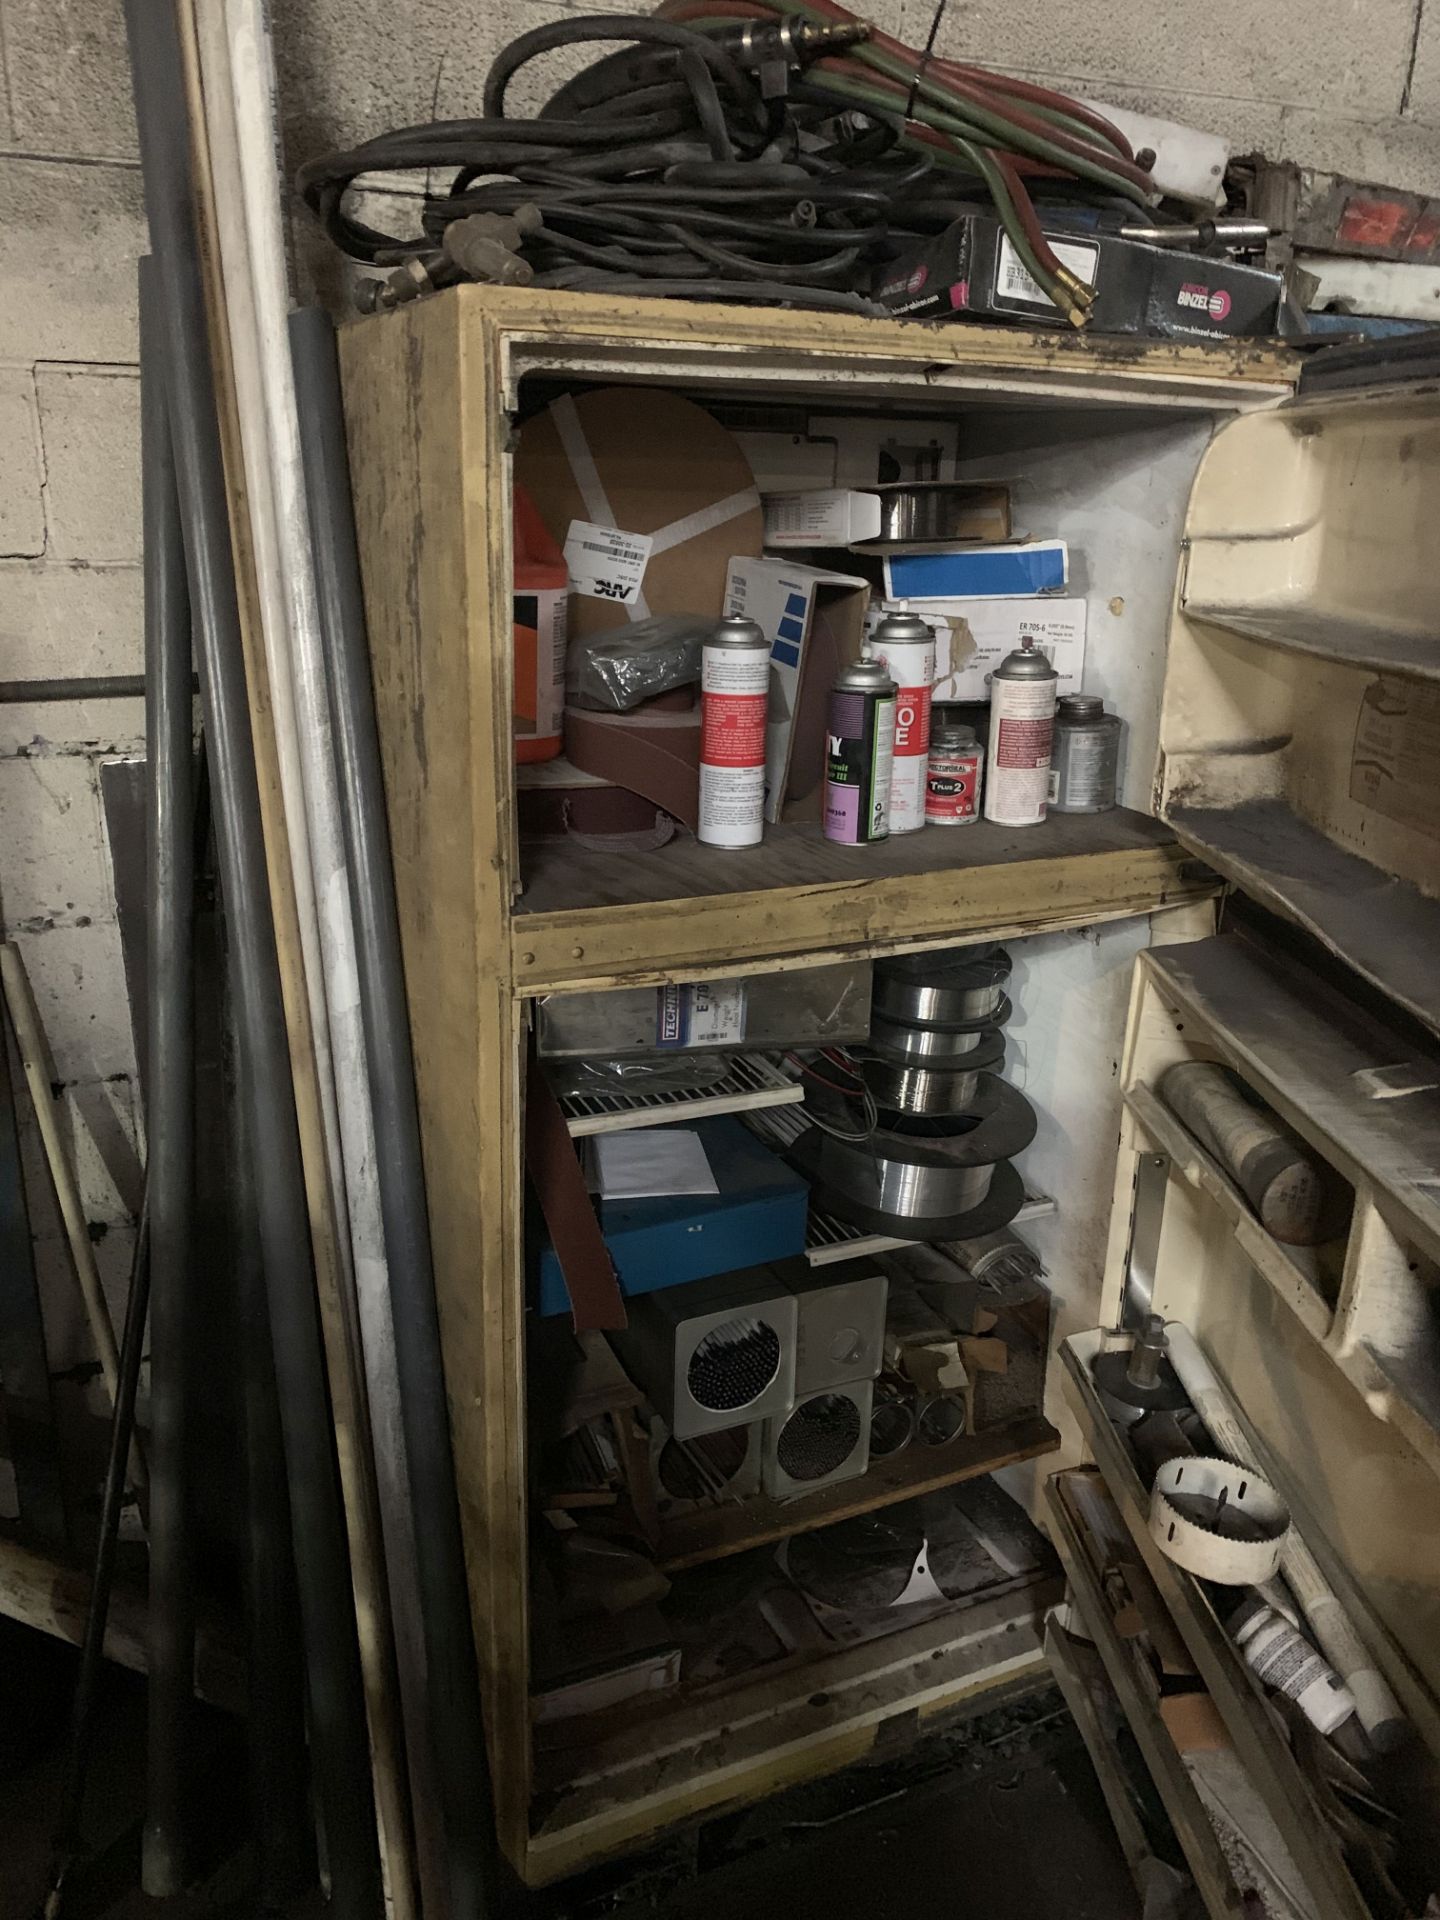 (LOT) REFRIGERATOR WITH WELDING SUPPLIES, 2-DOOR CABINET WITH MAINTENANCE ITEMS, AND RED CABINET - Image 3 of 3